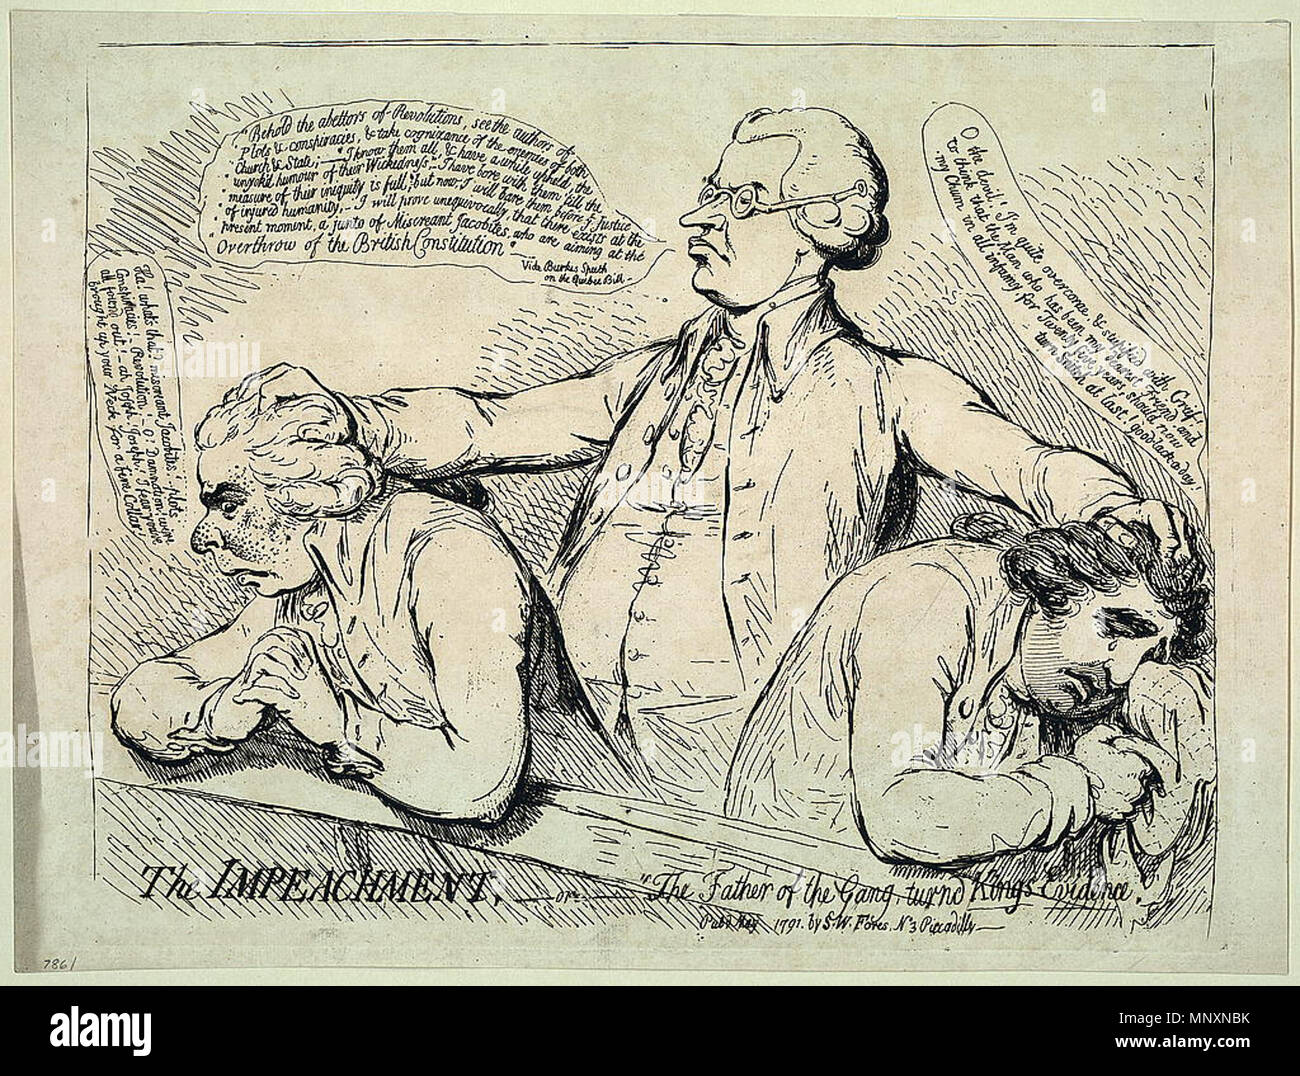 . TITLE: The impeachment, or 'The father of the gang turned Kings evidence' SUMMARY: Print shows Edmund Burke standing behind and with his hands on the heads of Richard B. Sheridan and Charles James Fox who bow before him over a railing, perhaps before Parliament. Burke says, 'Behold the abettors of Revolutions, see the authors of Plots & conspiracies, & take cognizance of the enemies of both Church & State ... who are aiming at the Overthrow of the British Constitution.' MEDIUM: 1 print : etching. CREATED/PUBLISHED: [London] : Pubd. by S.W. Fores, No. 3 Piccadilly, 1791 May. CREATOR: Gillray, Stock Photo